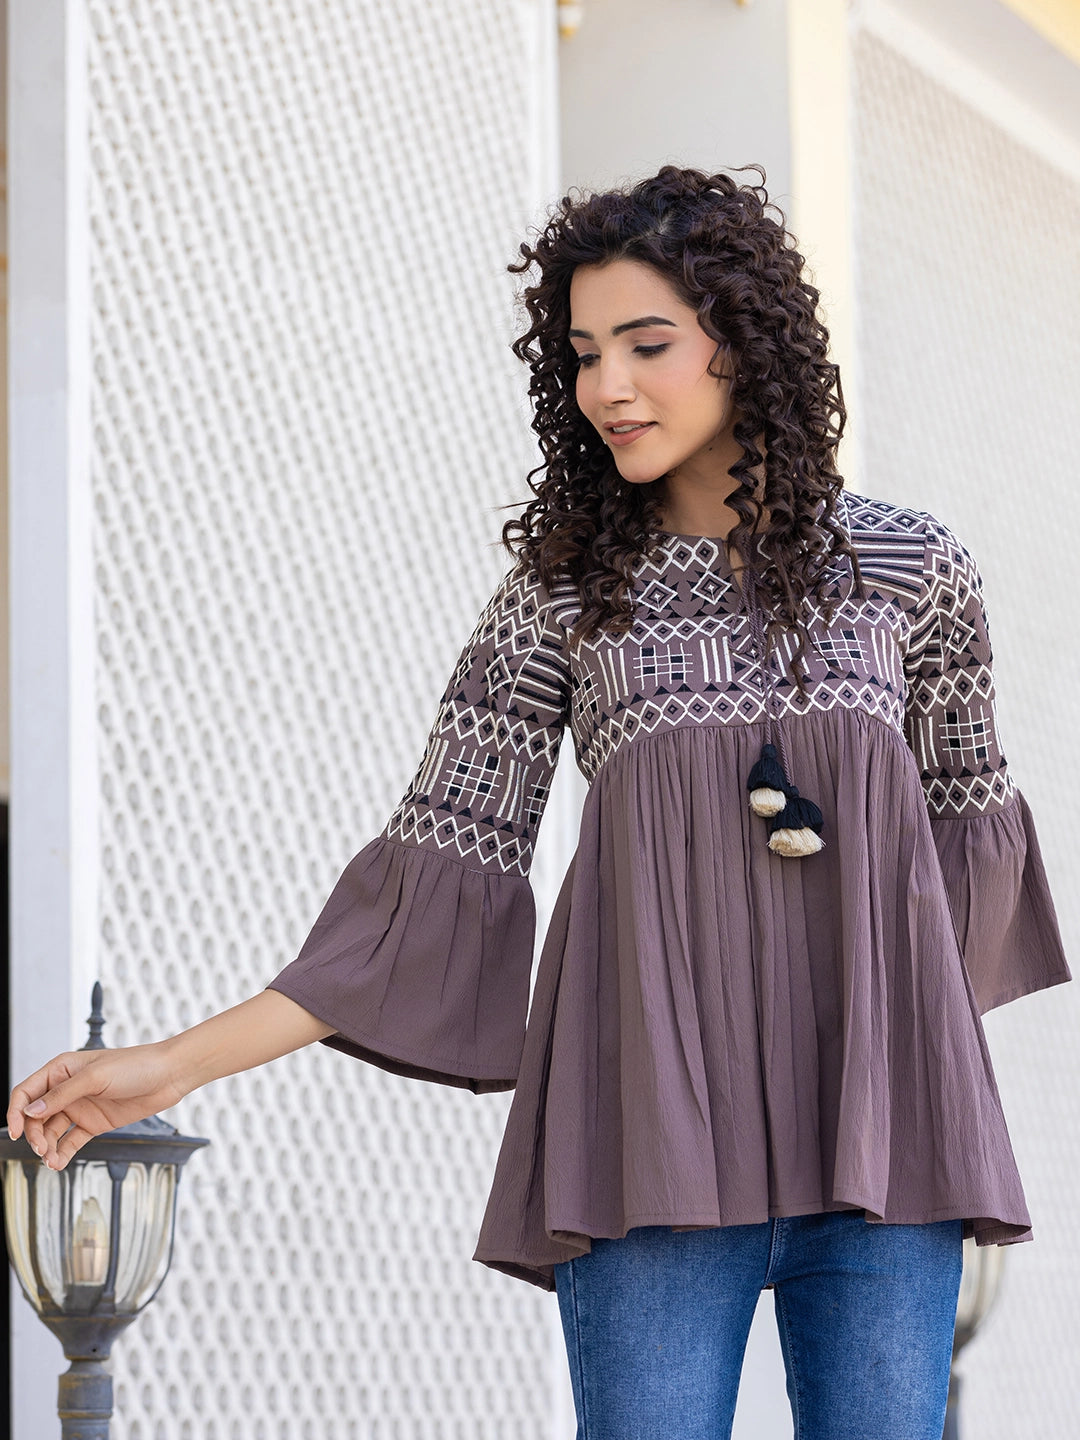 Chic Charm: Crepe Fabric Top